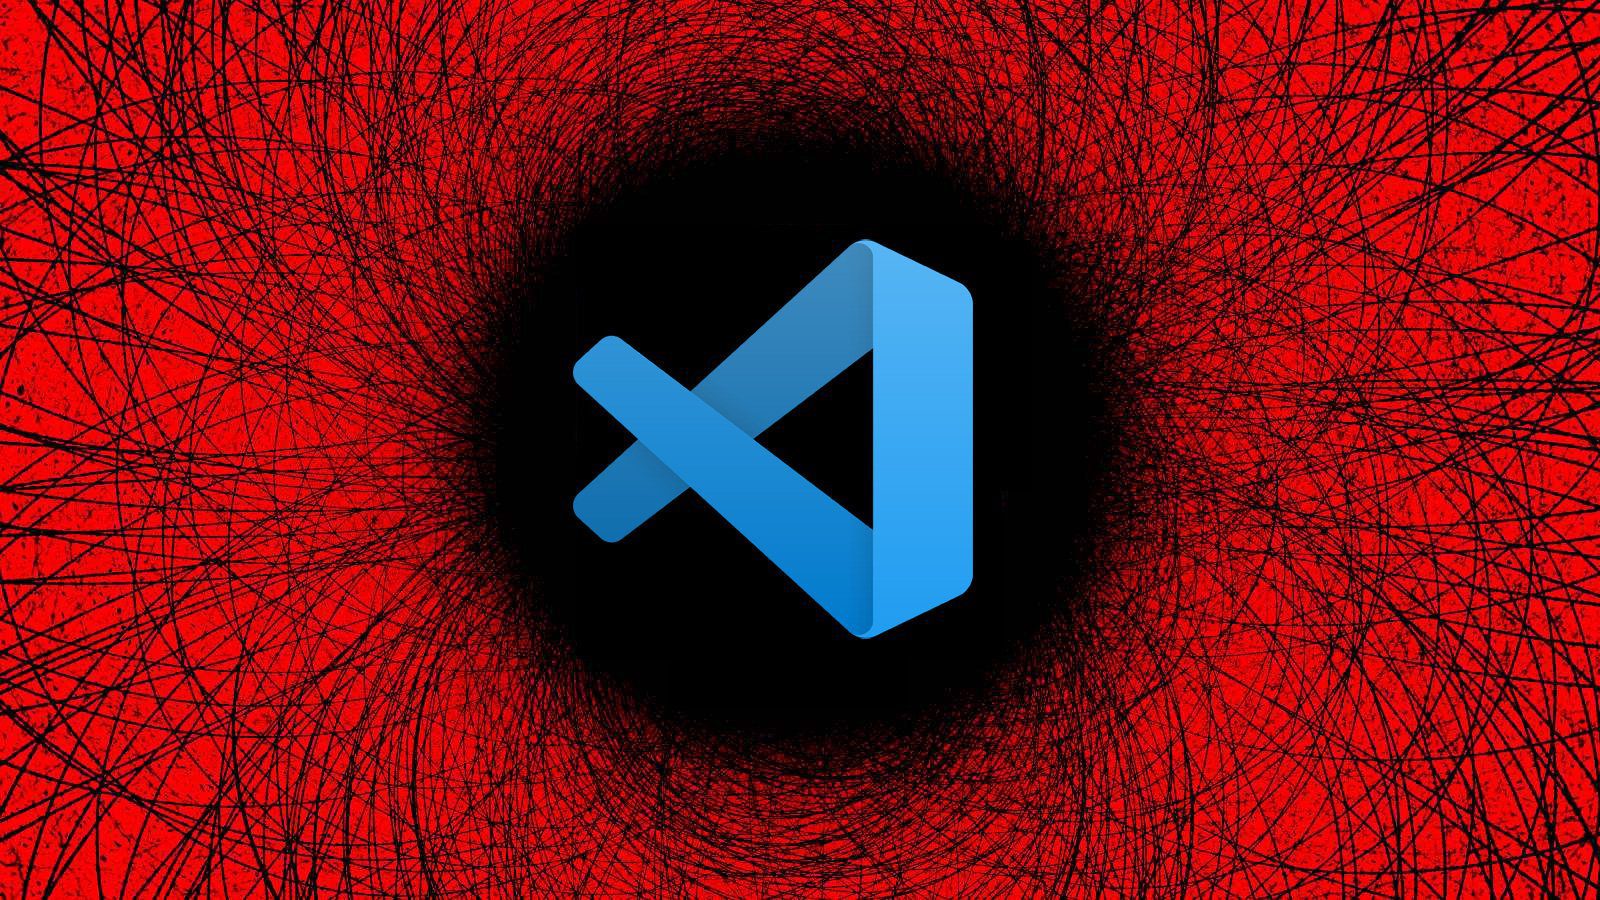 Malicious Microsoft VSCode extensions steal passwords, open remote shells – Source: www.bleepingcomputer.com